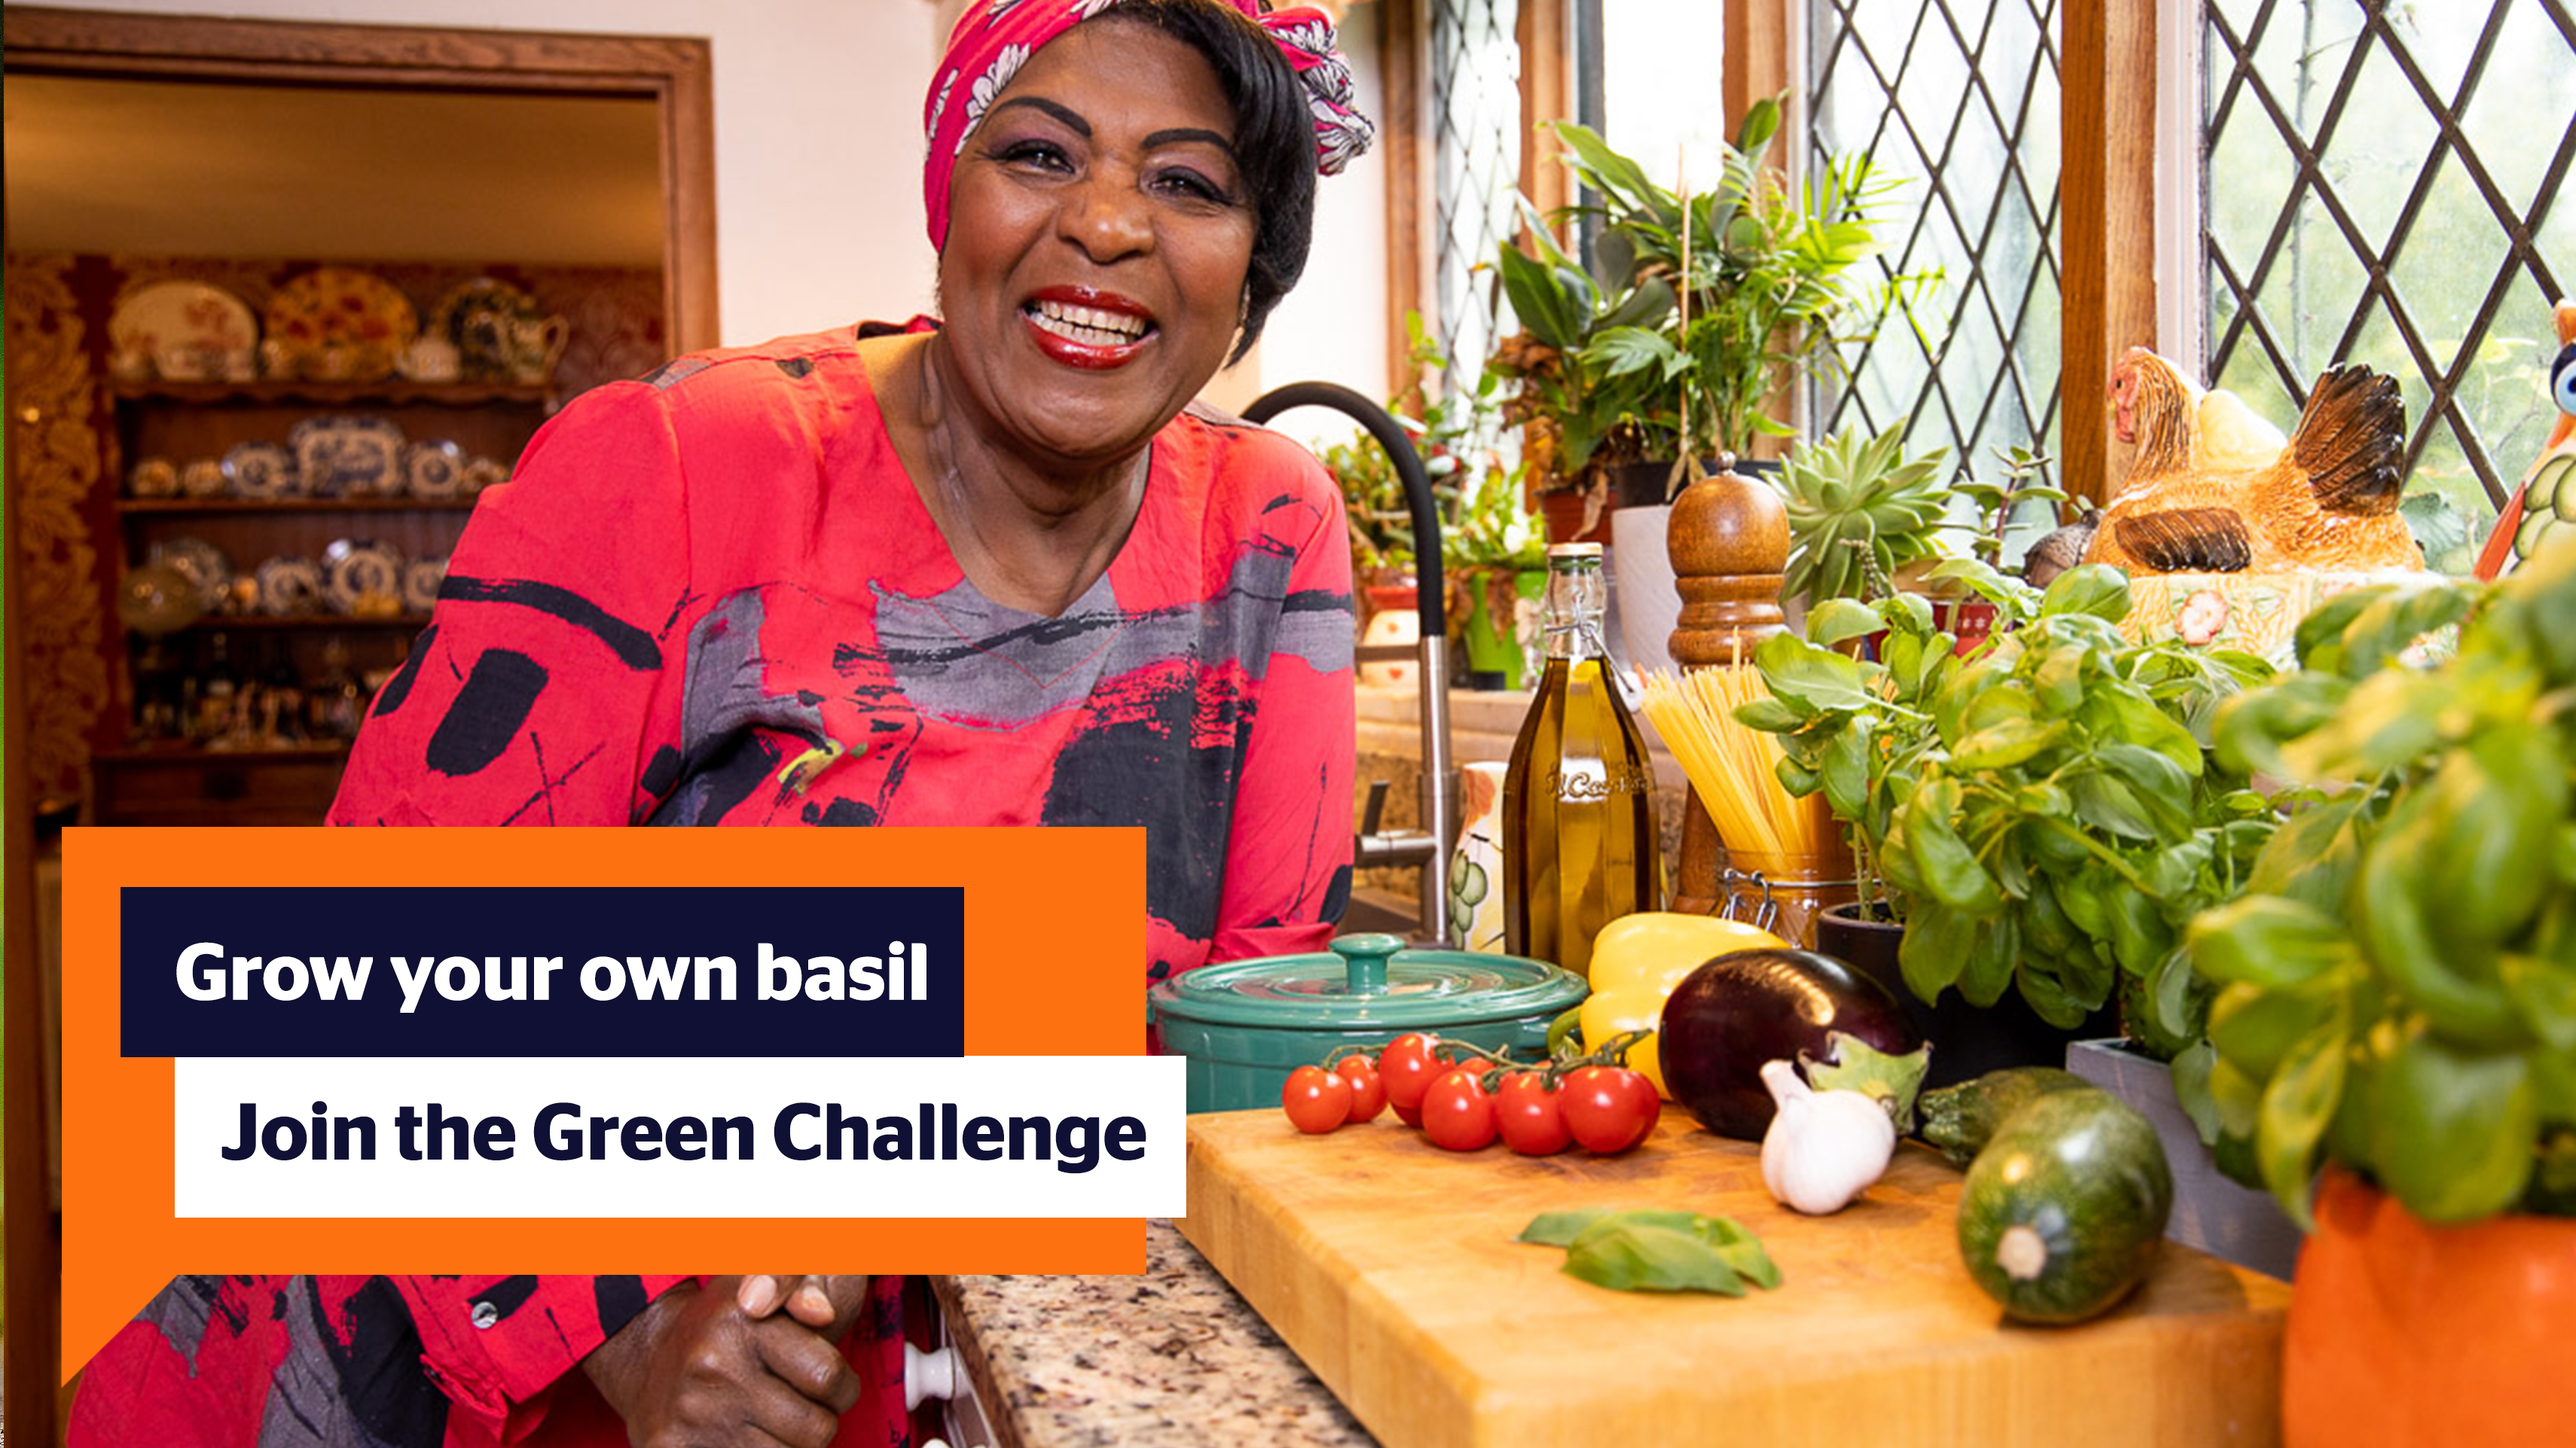 Grow your own basil. Join the Green Challenge. TV Chef Rustie Lee in the kitchen.